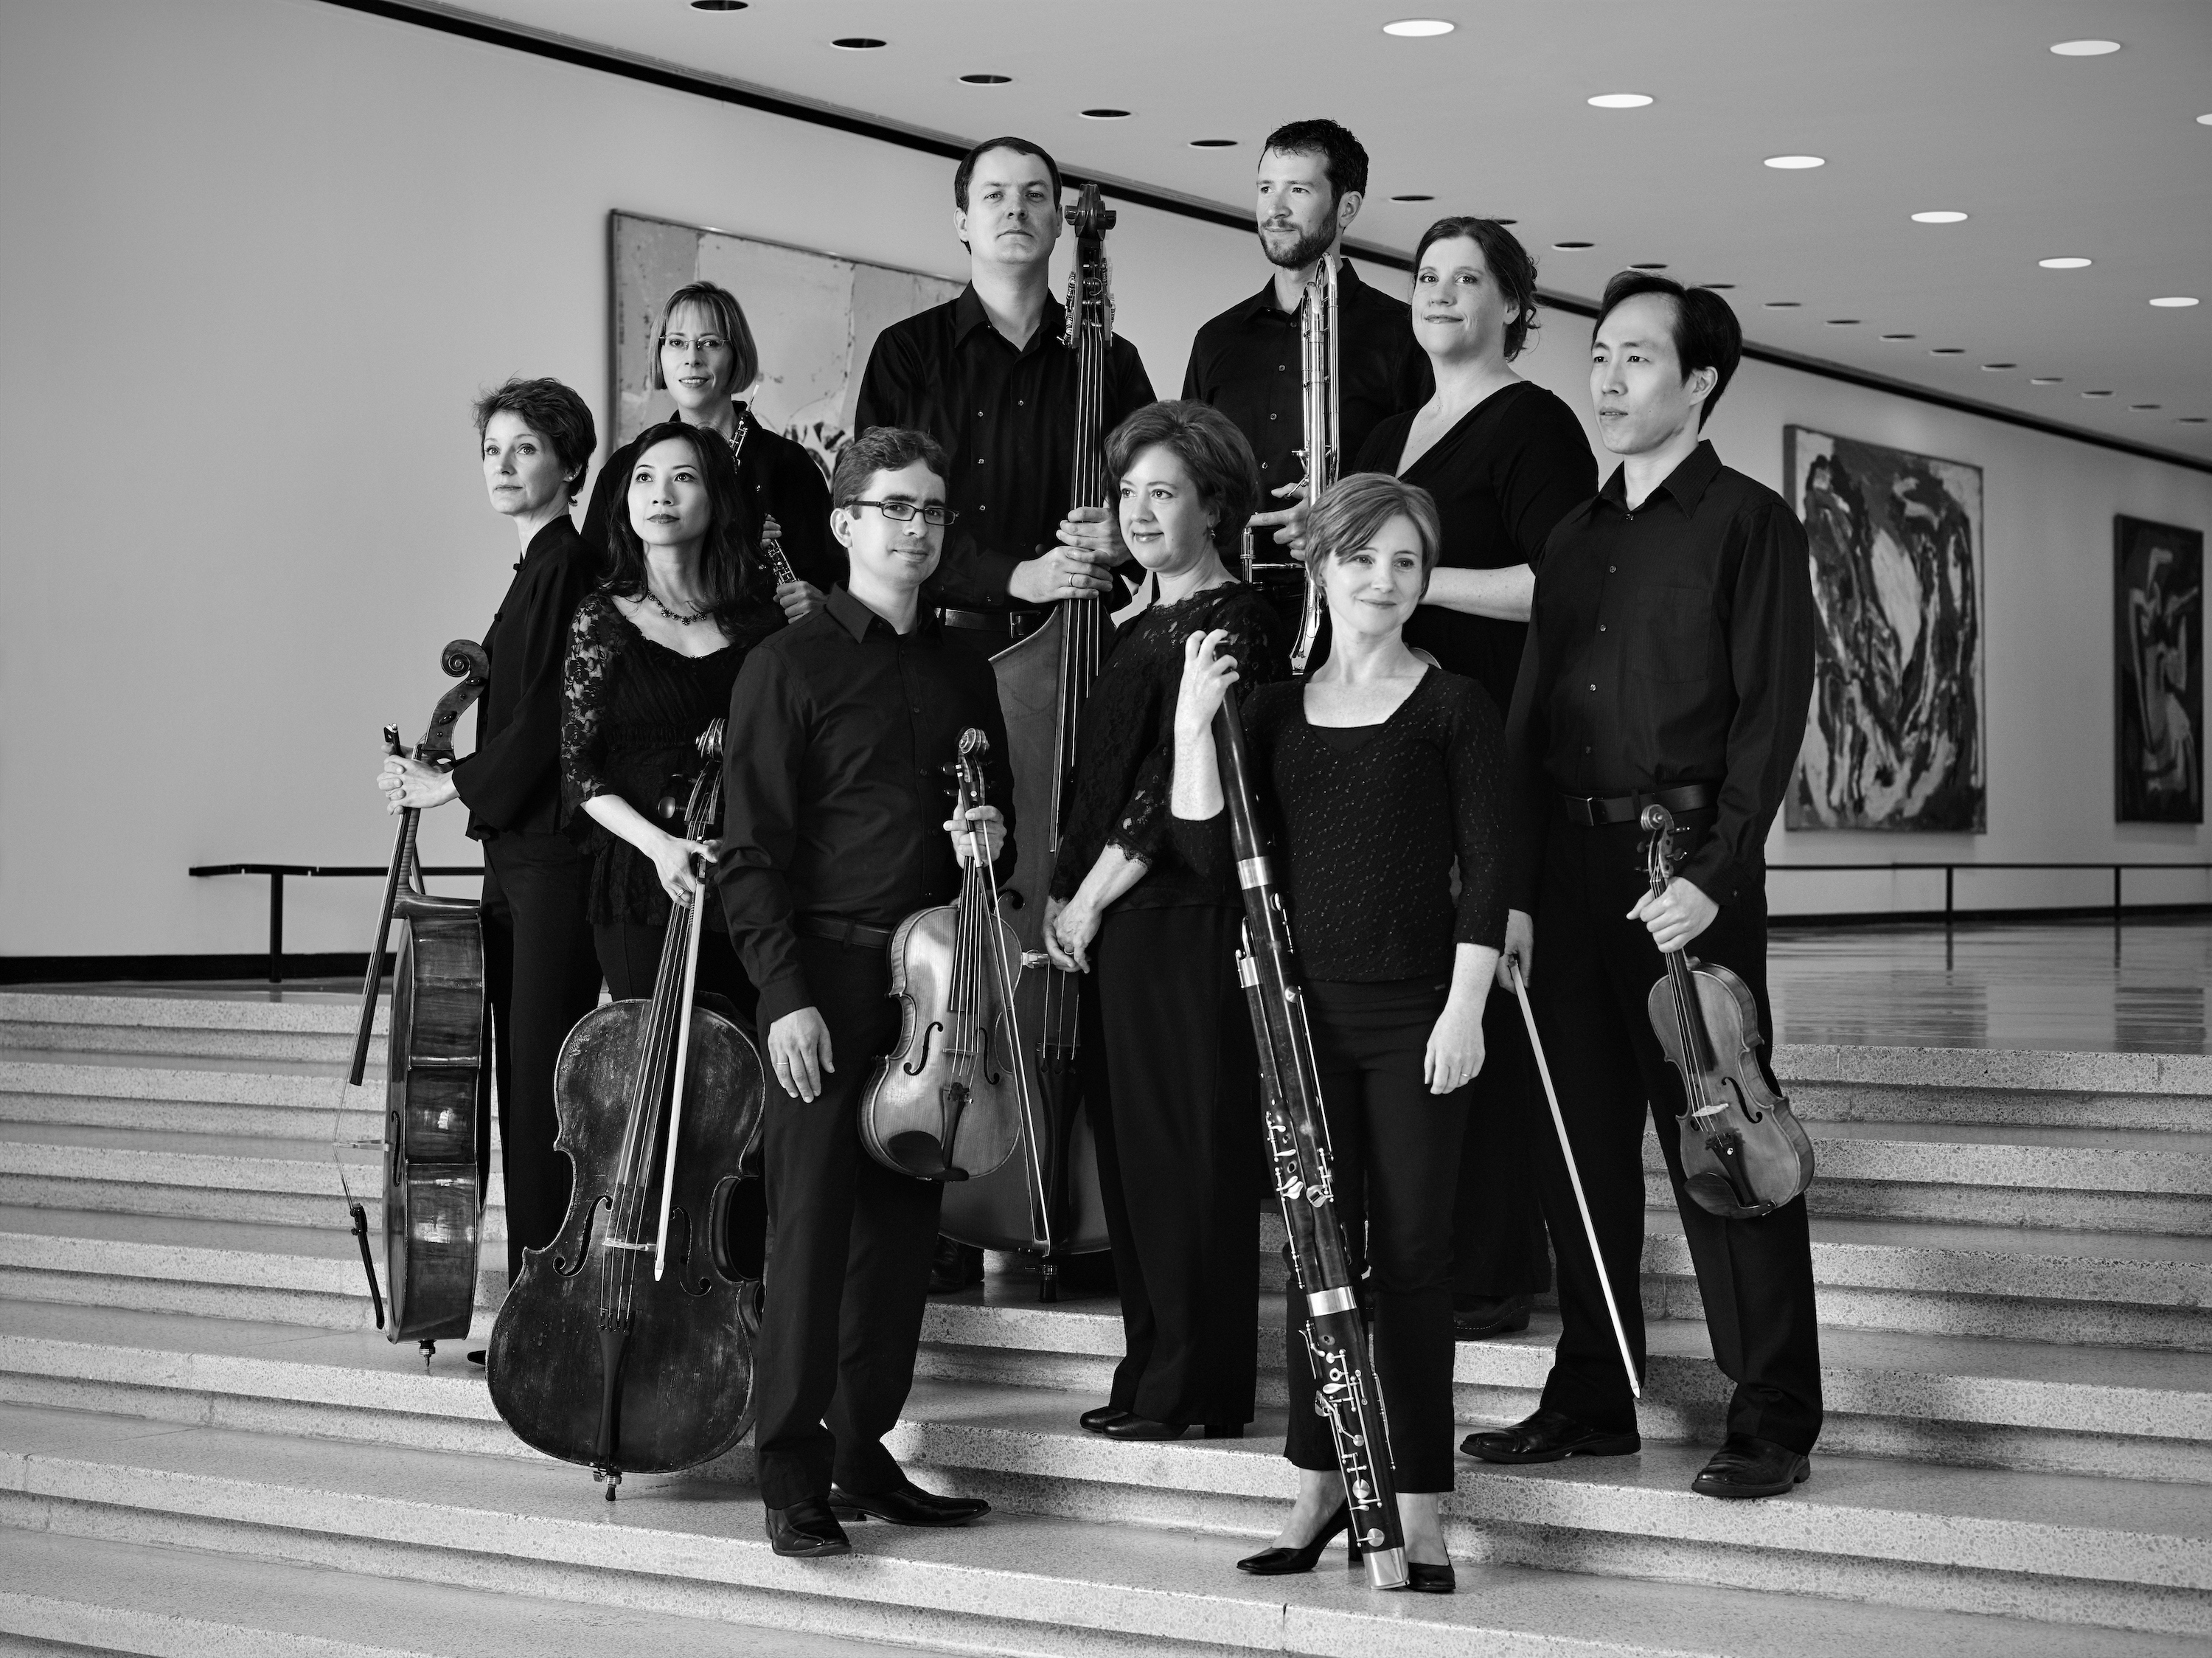 Orchestra members posing with their instruments in a black and white photo